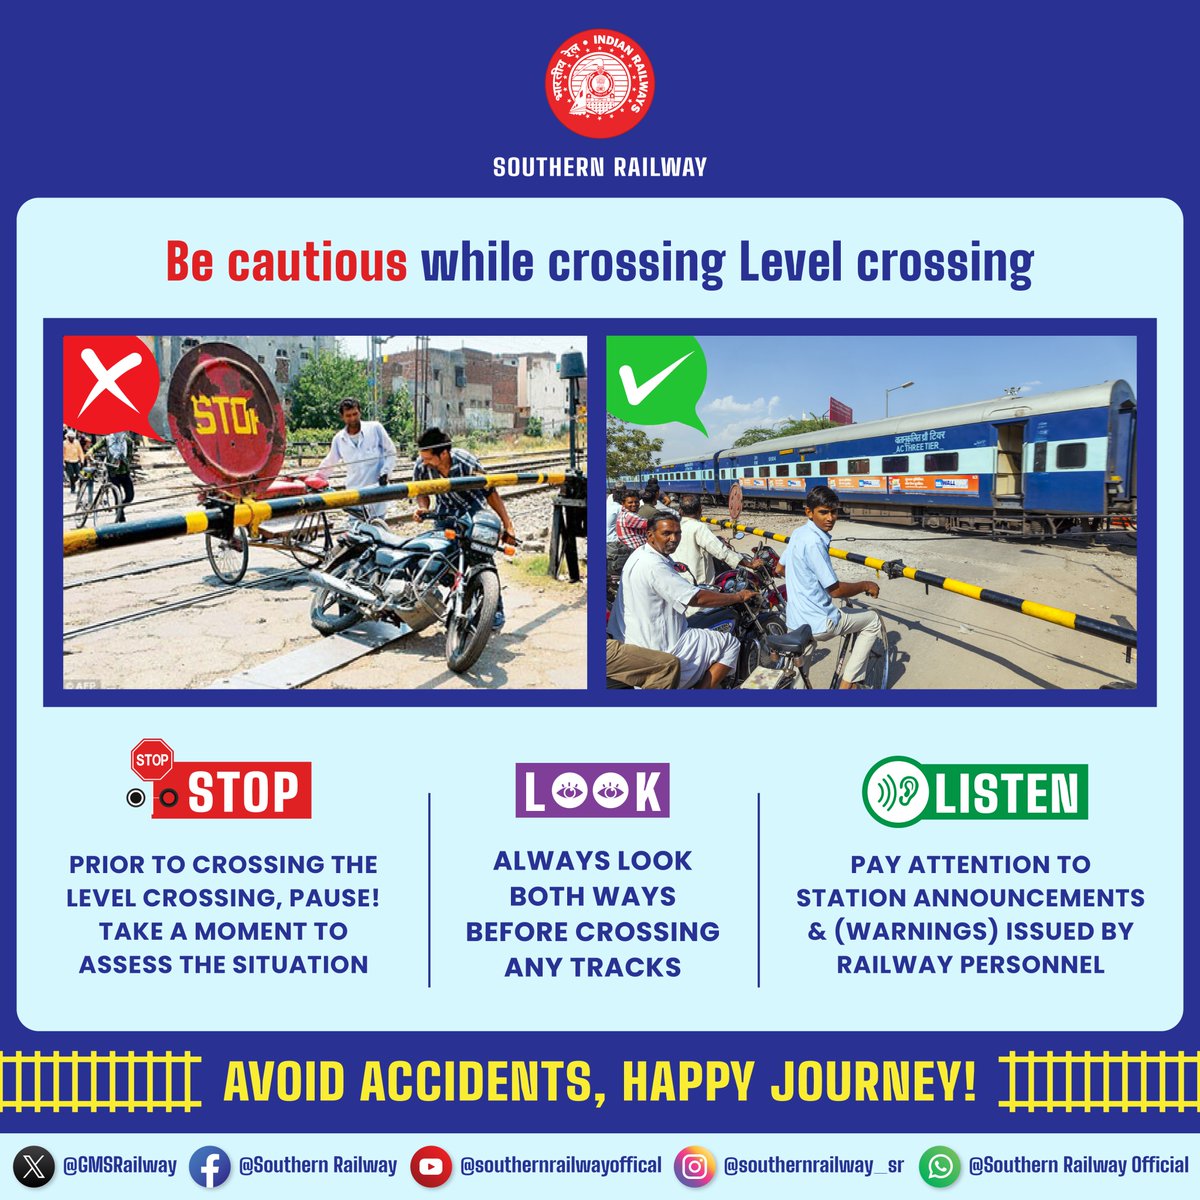 🚂 #SafetyFirst 🛑 

Before crossing the railway #track, take a moment to ensure your #safety. 

Pause, look around for approaching #trains, and listen for rail announcements. 

Your life matters, so let's make every #journey a safe one. 🚆💙 

#SouthernRailway #RailwaySafety